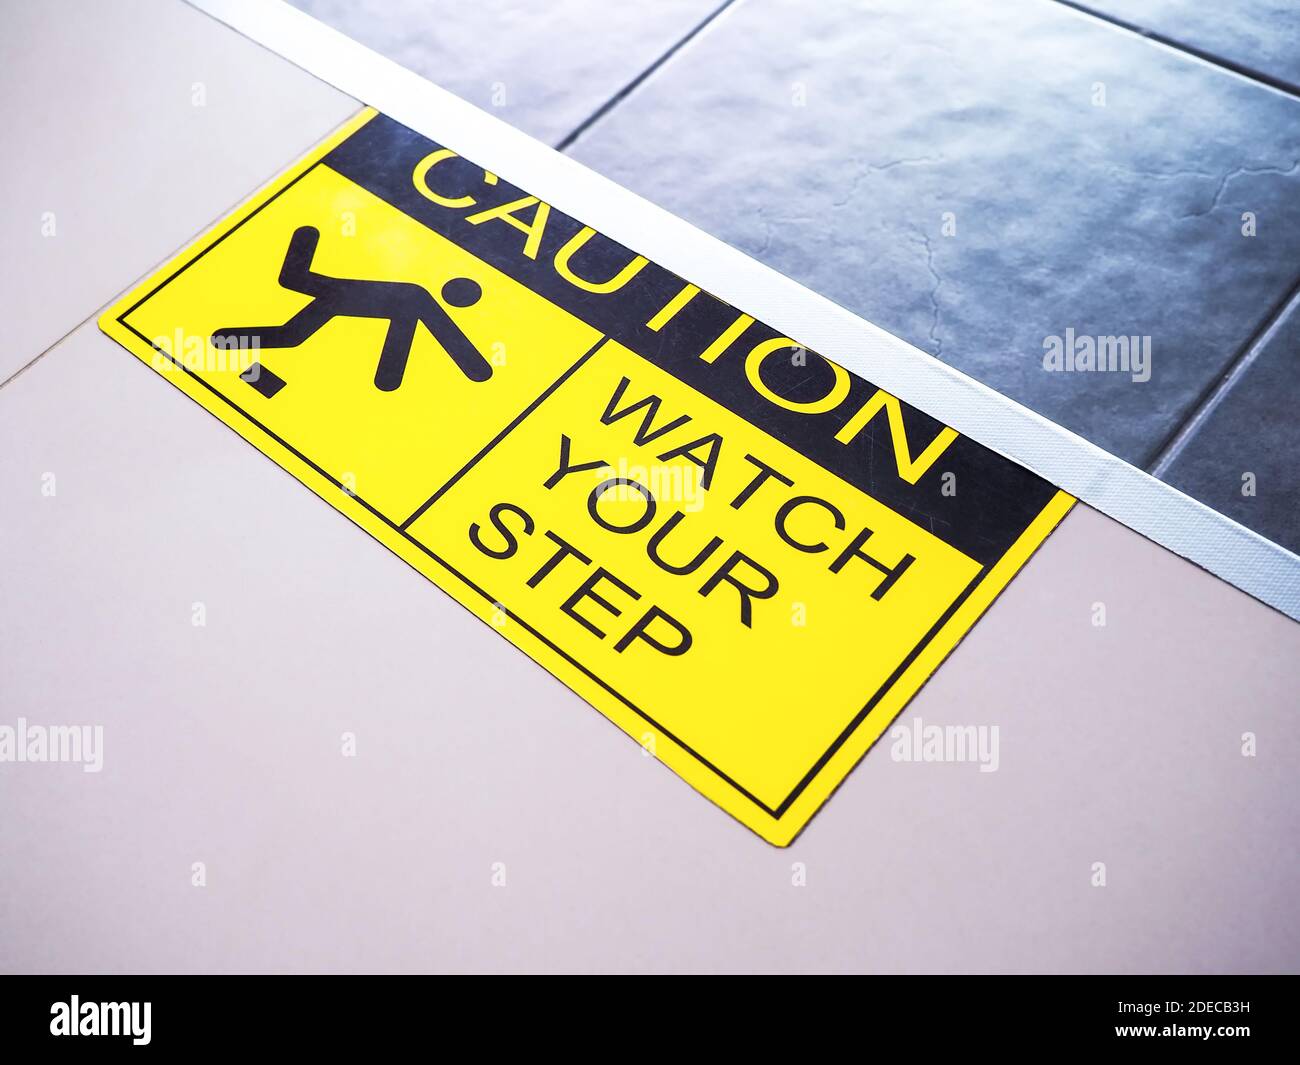 'Caution watch your step' on yellow and black warning sticker sign on the floor, warning and care when going up or down steps. Stock Photo